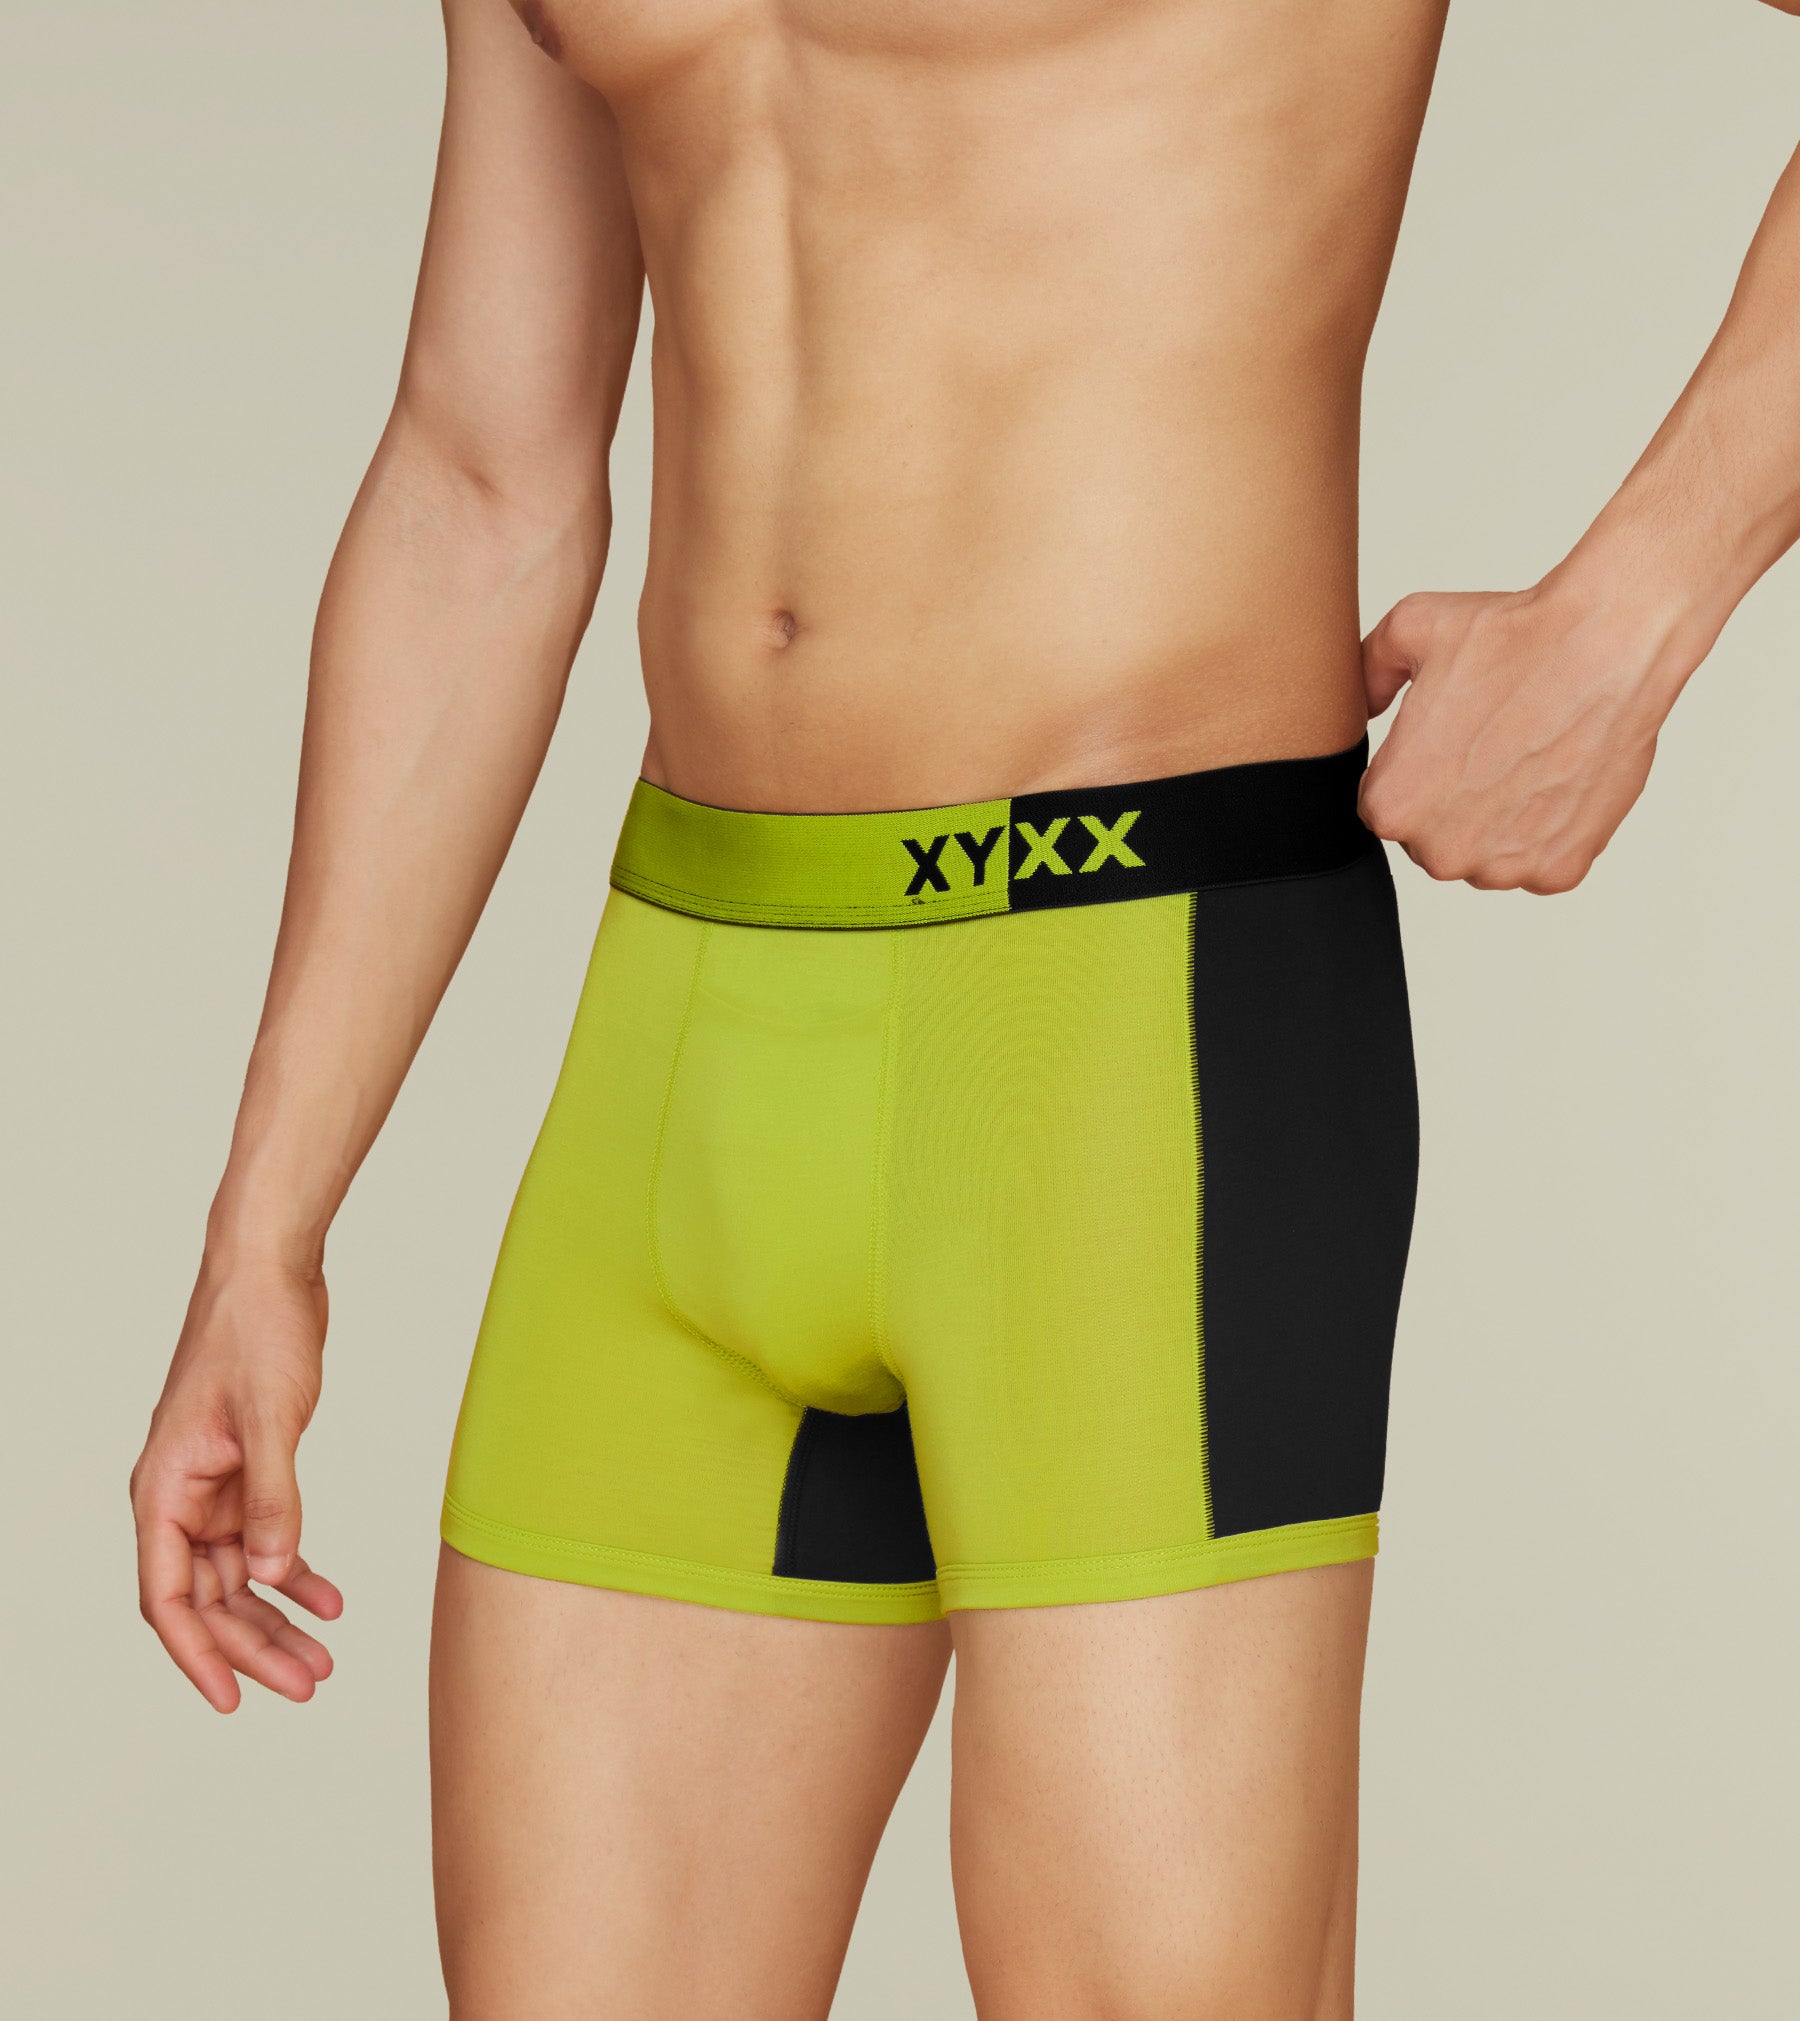 Dualist Modal Trunks For Men Pack of 3 (Aqua Blue, Lime Yellow, Blue) -  XYXX Mens Apparels